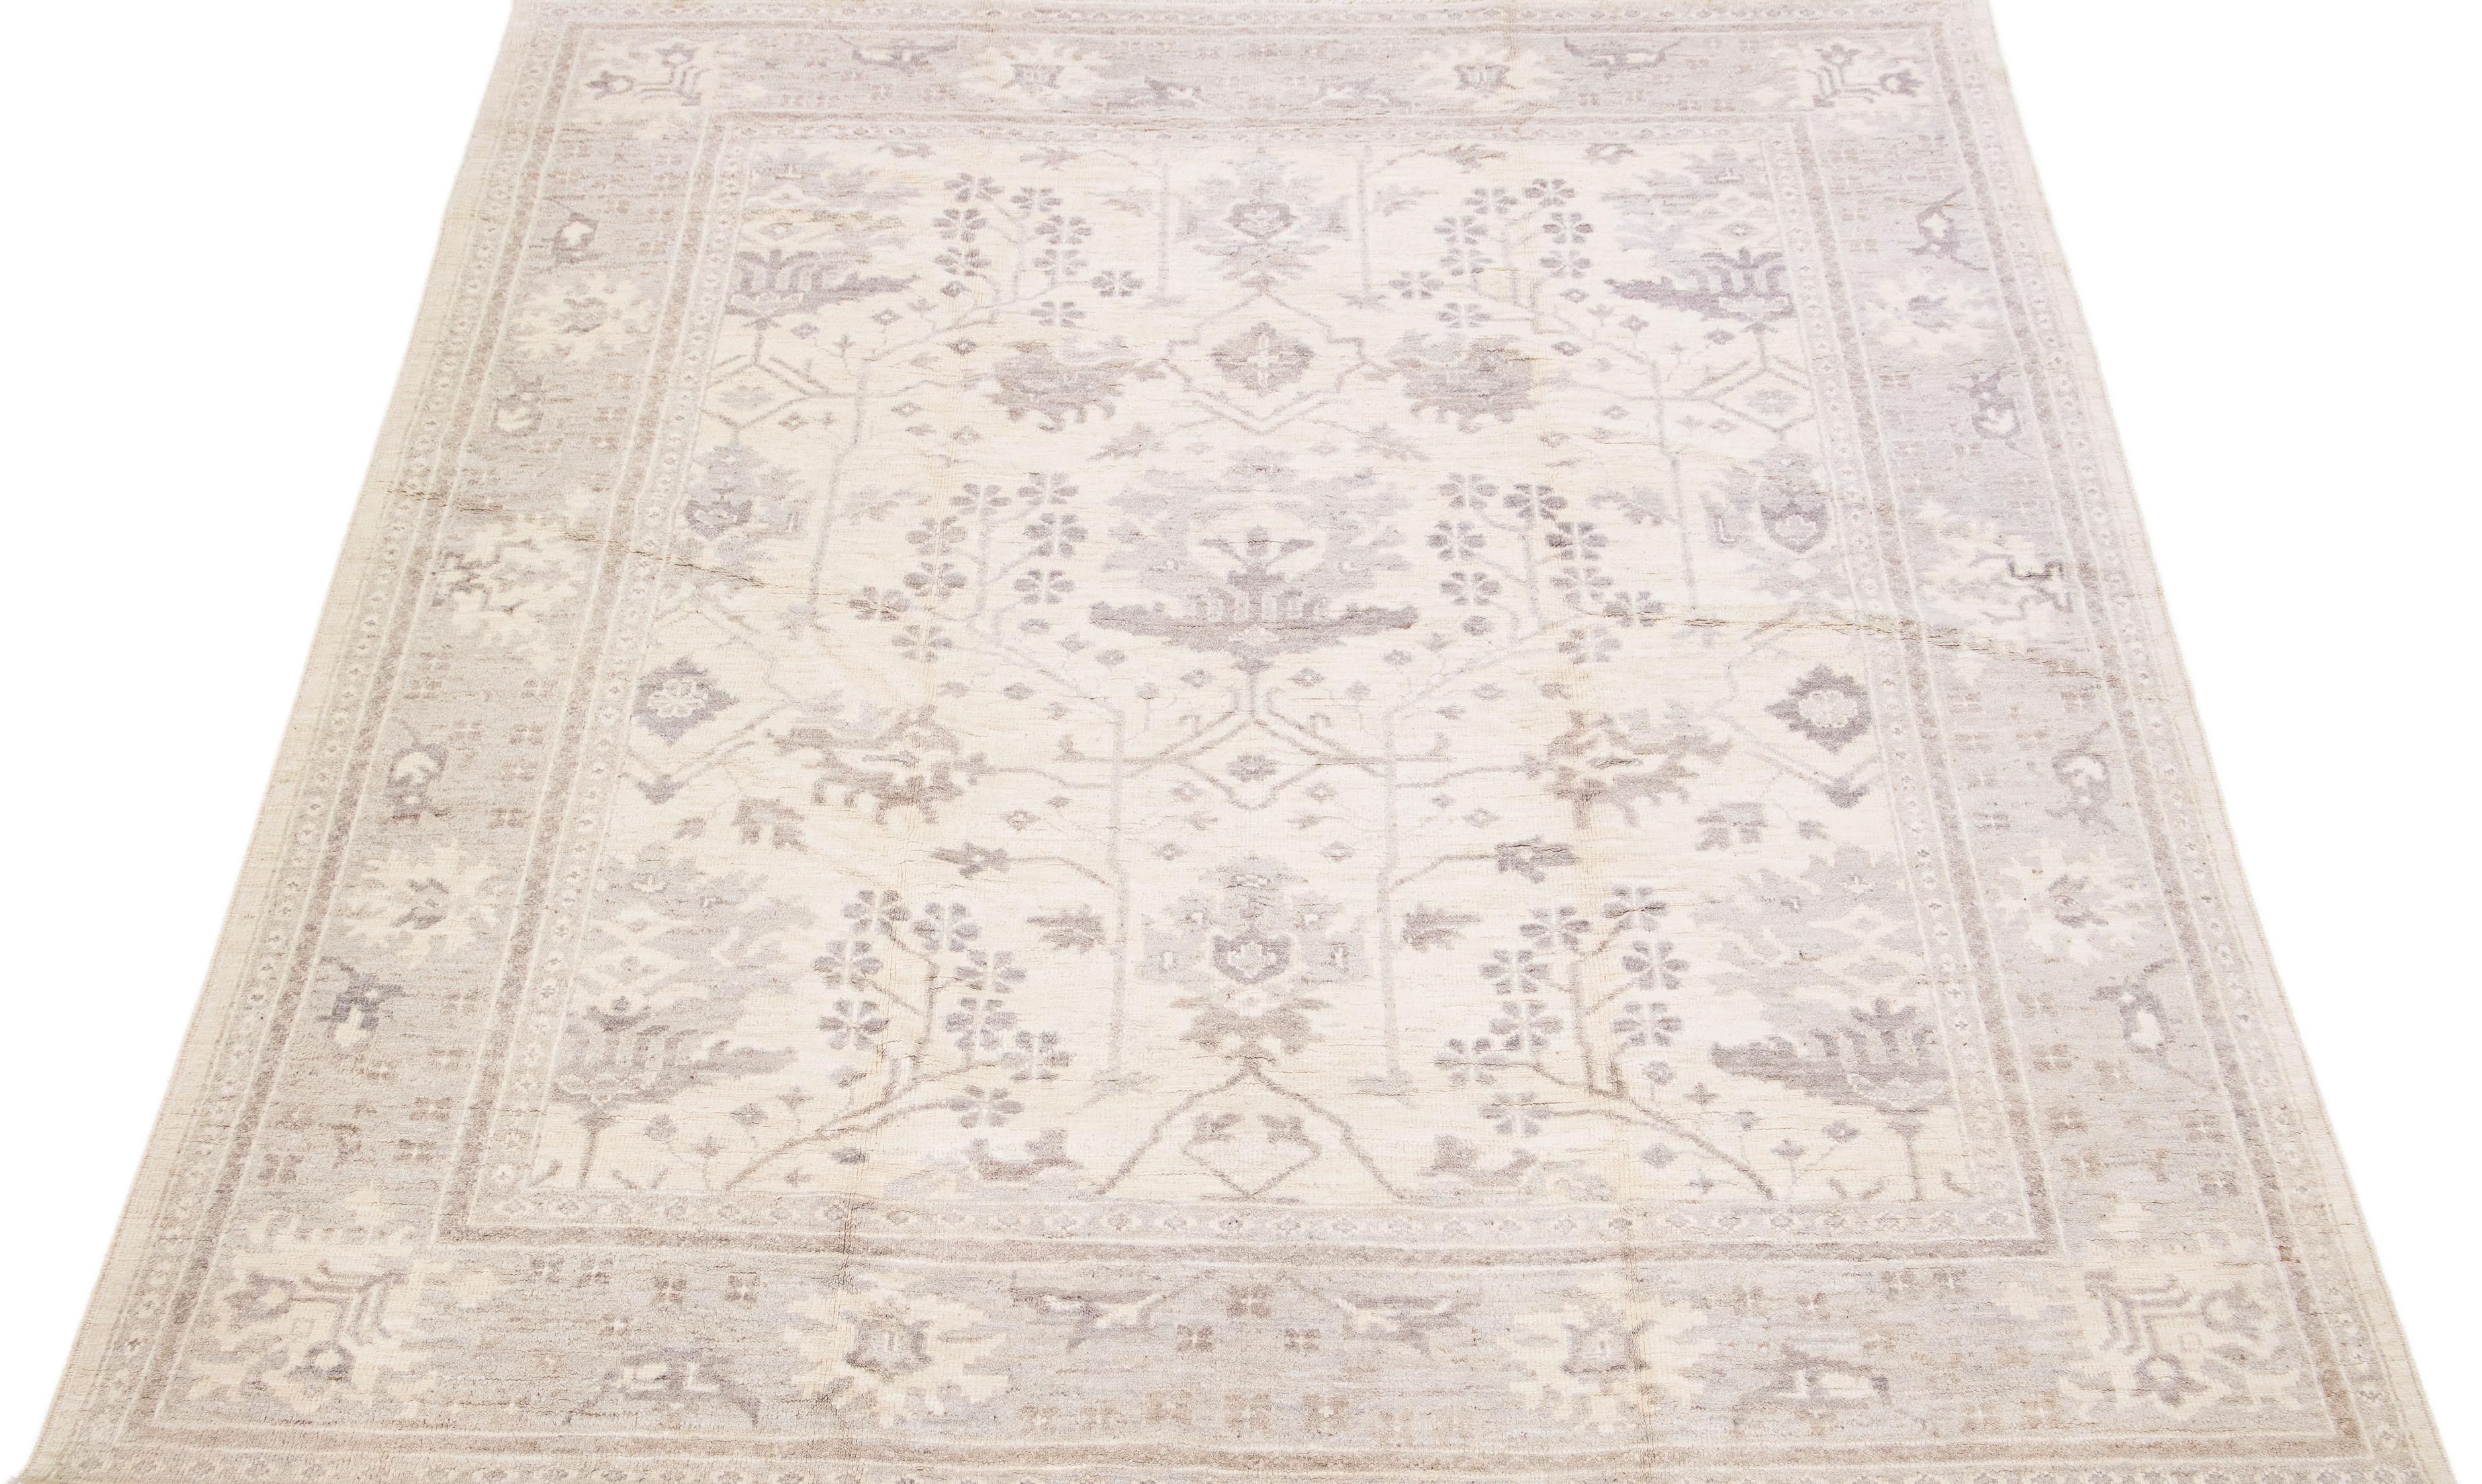 Beautiful modern Oushak hand-knotted wool rug with a beige color field. This Turkish Piece has gray accent colors in a gorgeous all-over floral design.

This rug measures: 7'10